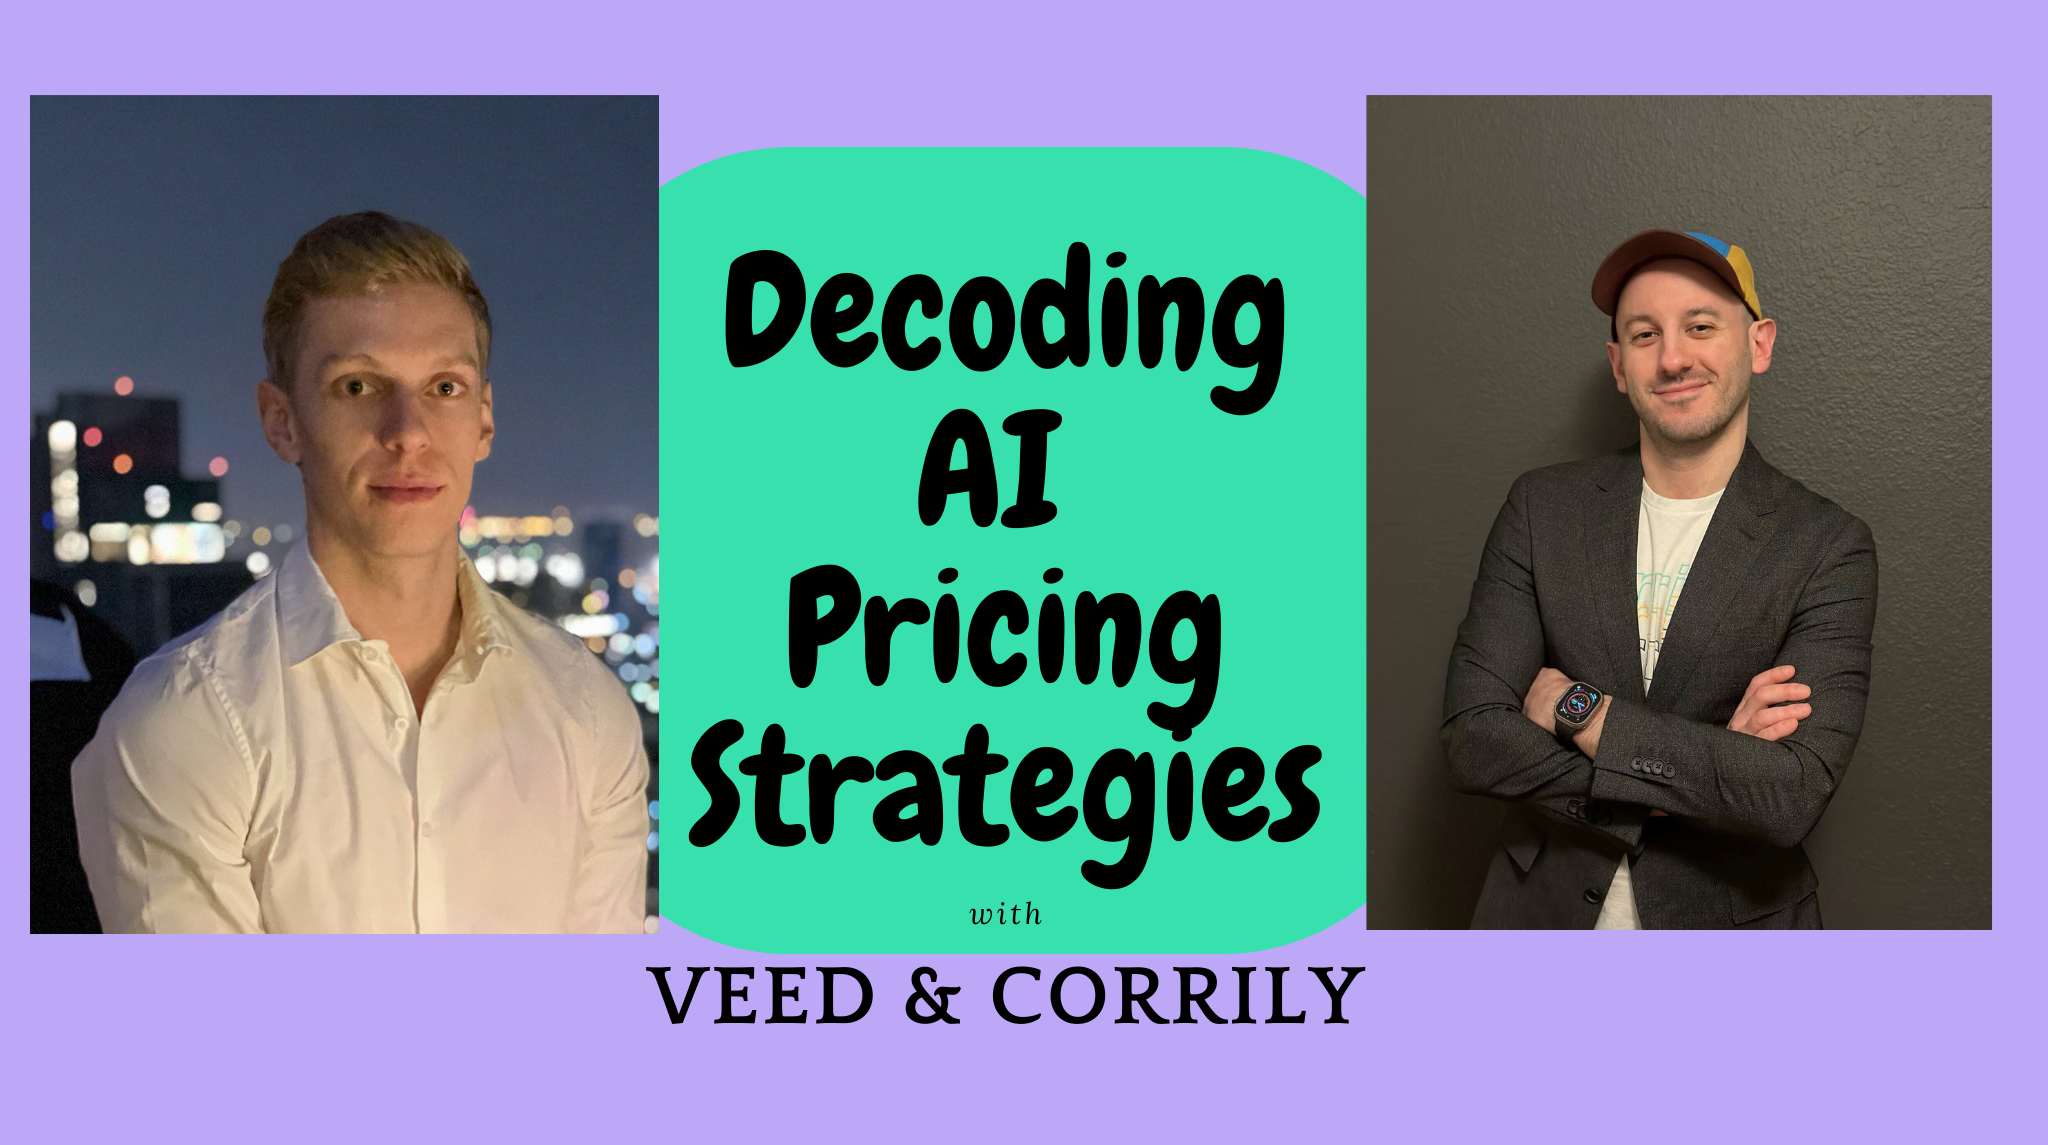 Decoding AI Pricing Strategies: Insights from an Interview with Veed's Jurn van Wissen